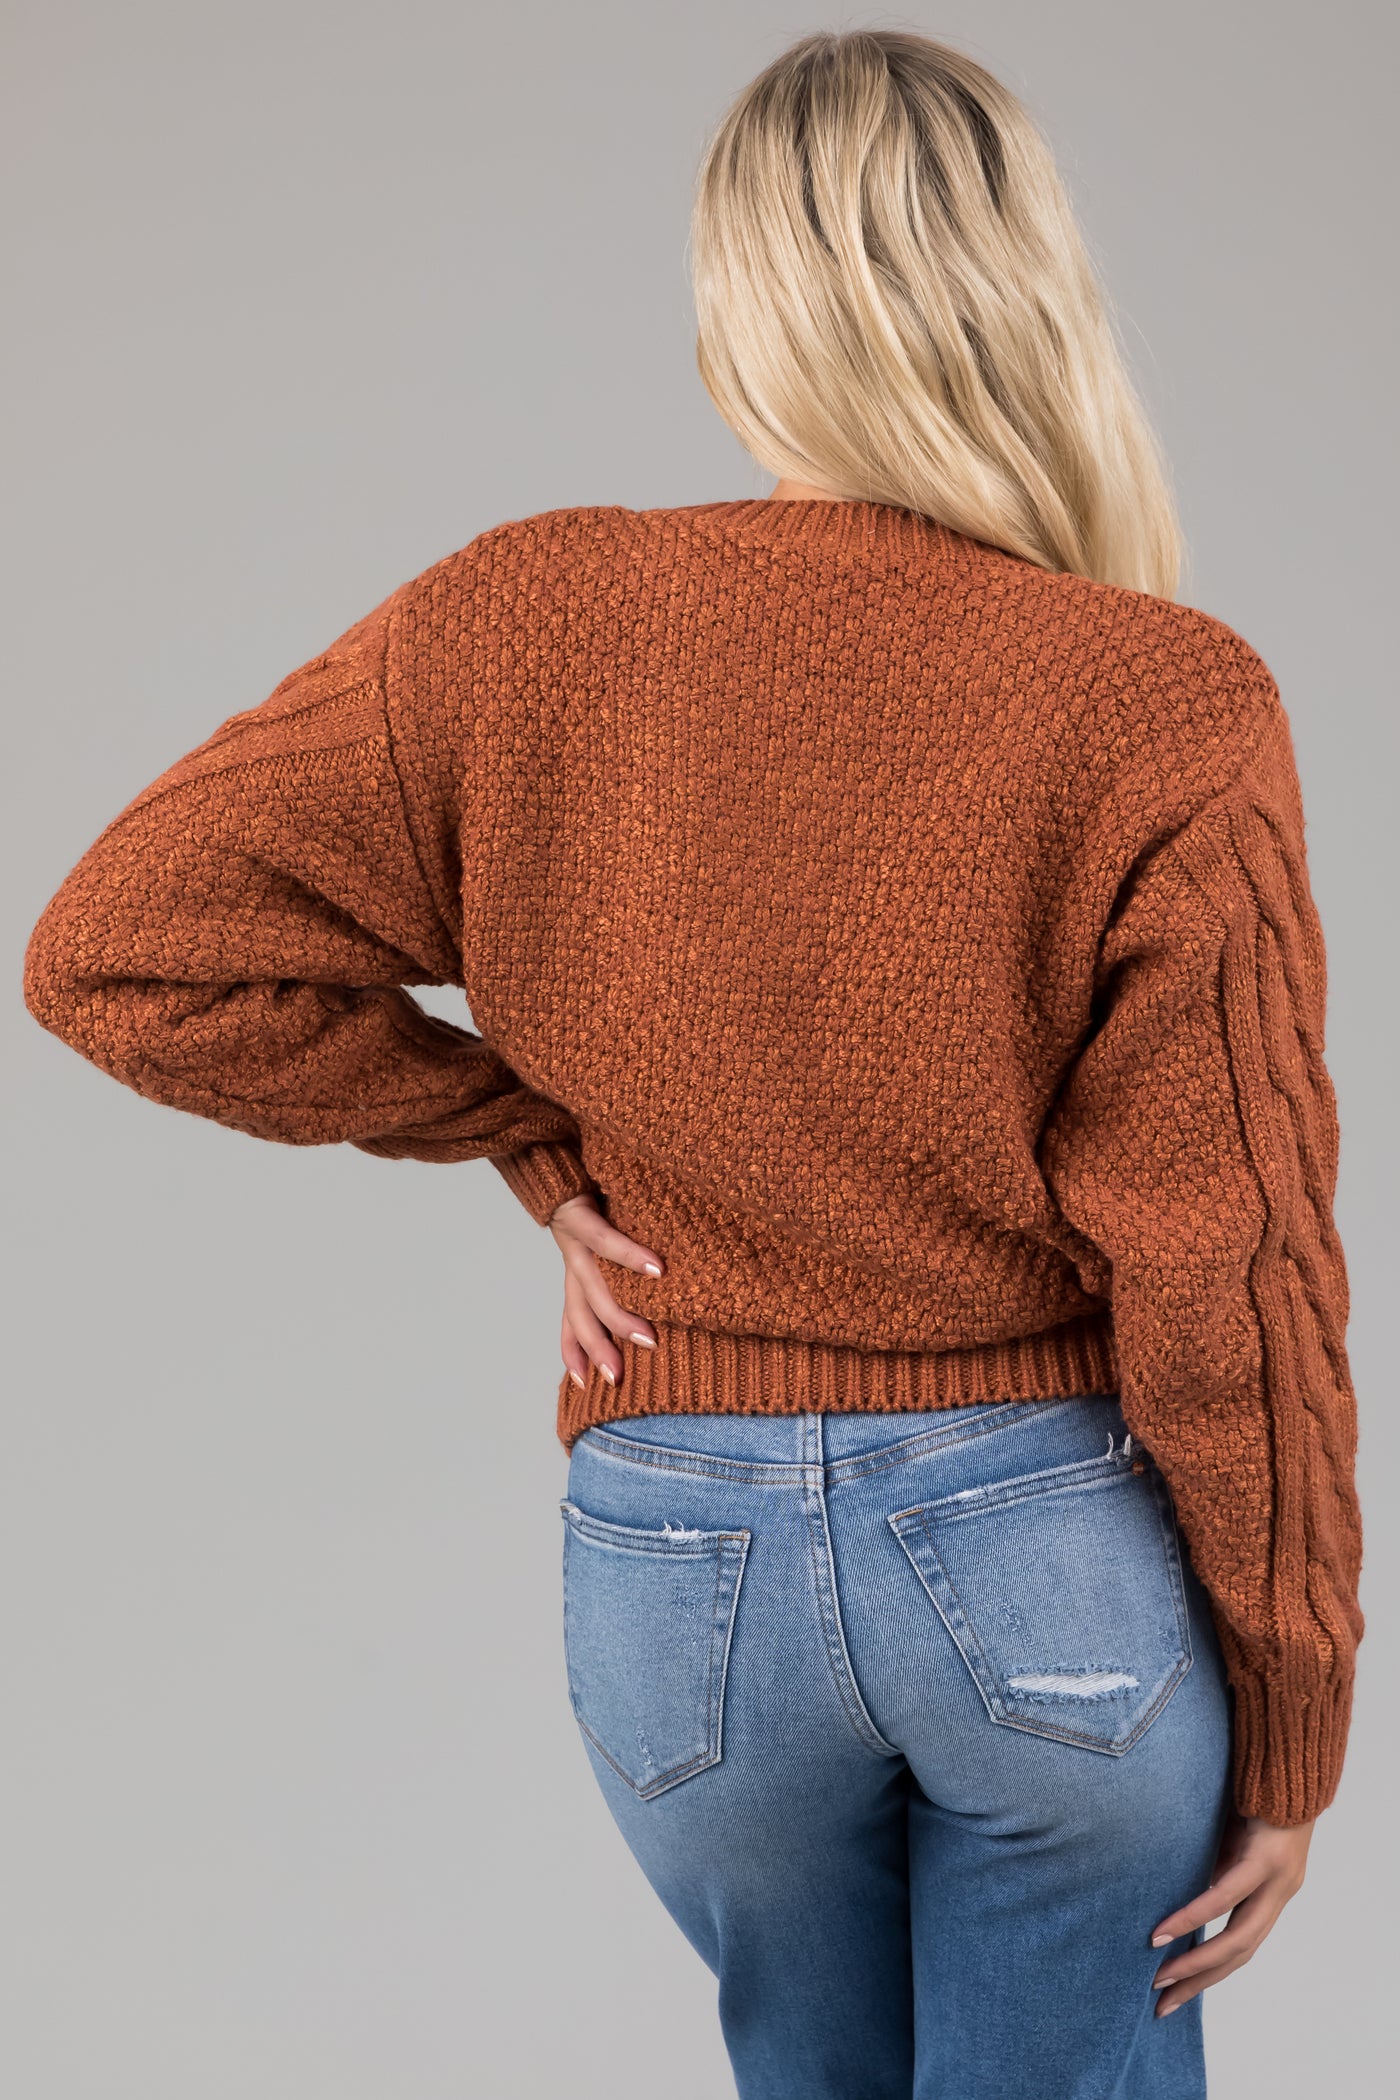 Pumpkin Spice Thick Cable Knit Button Cardigan